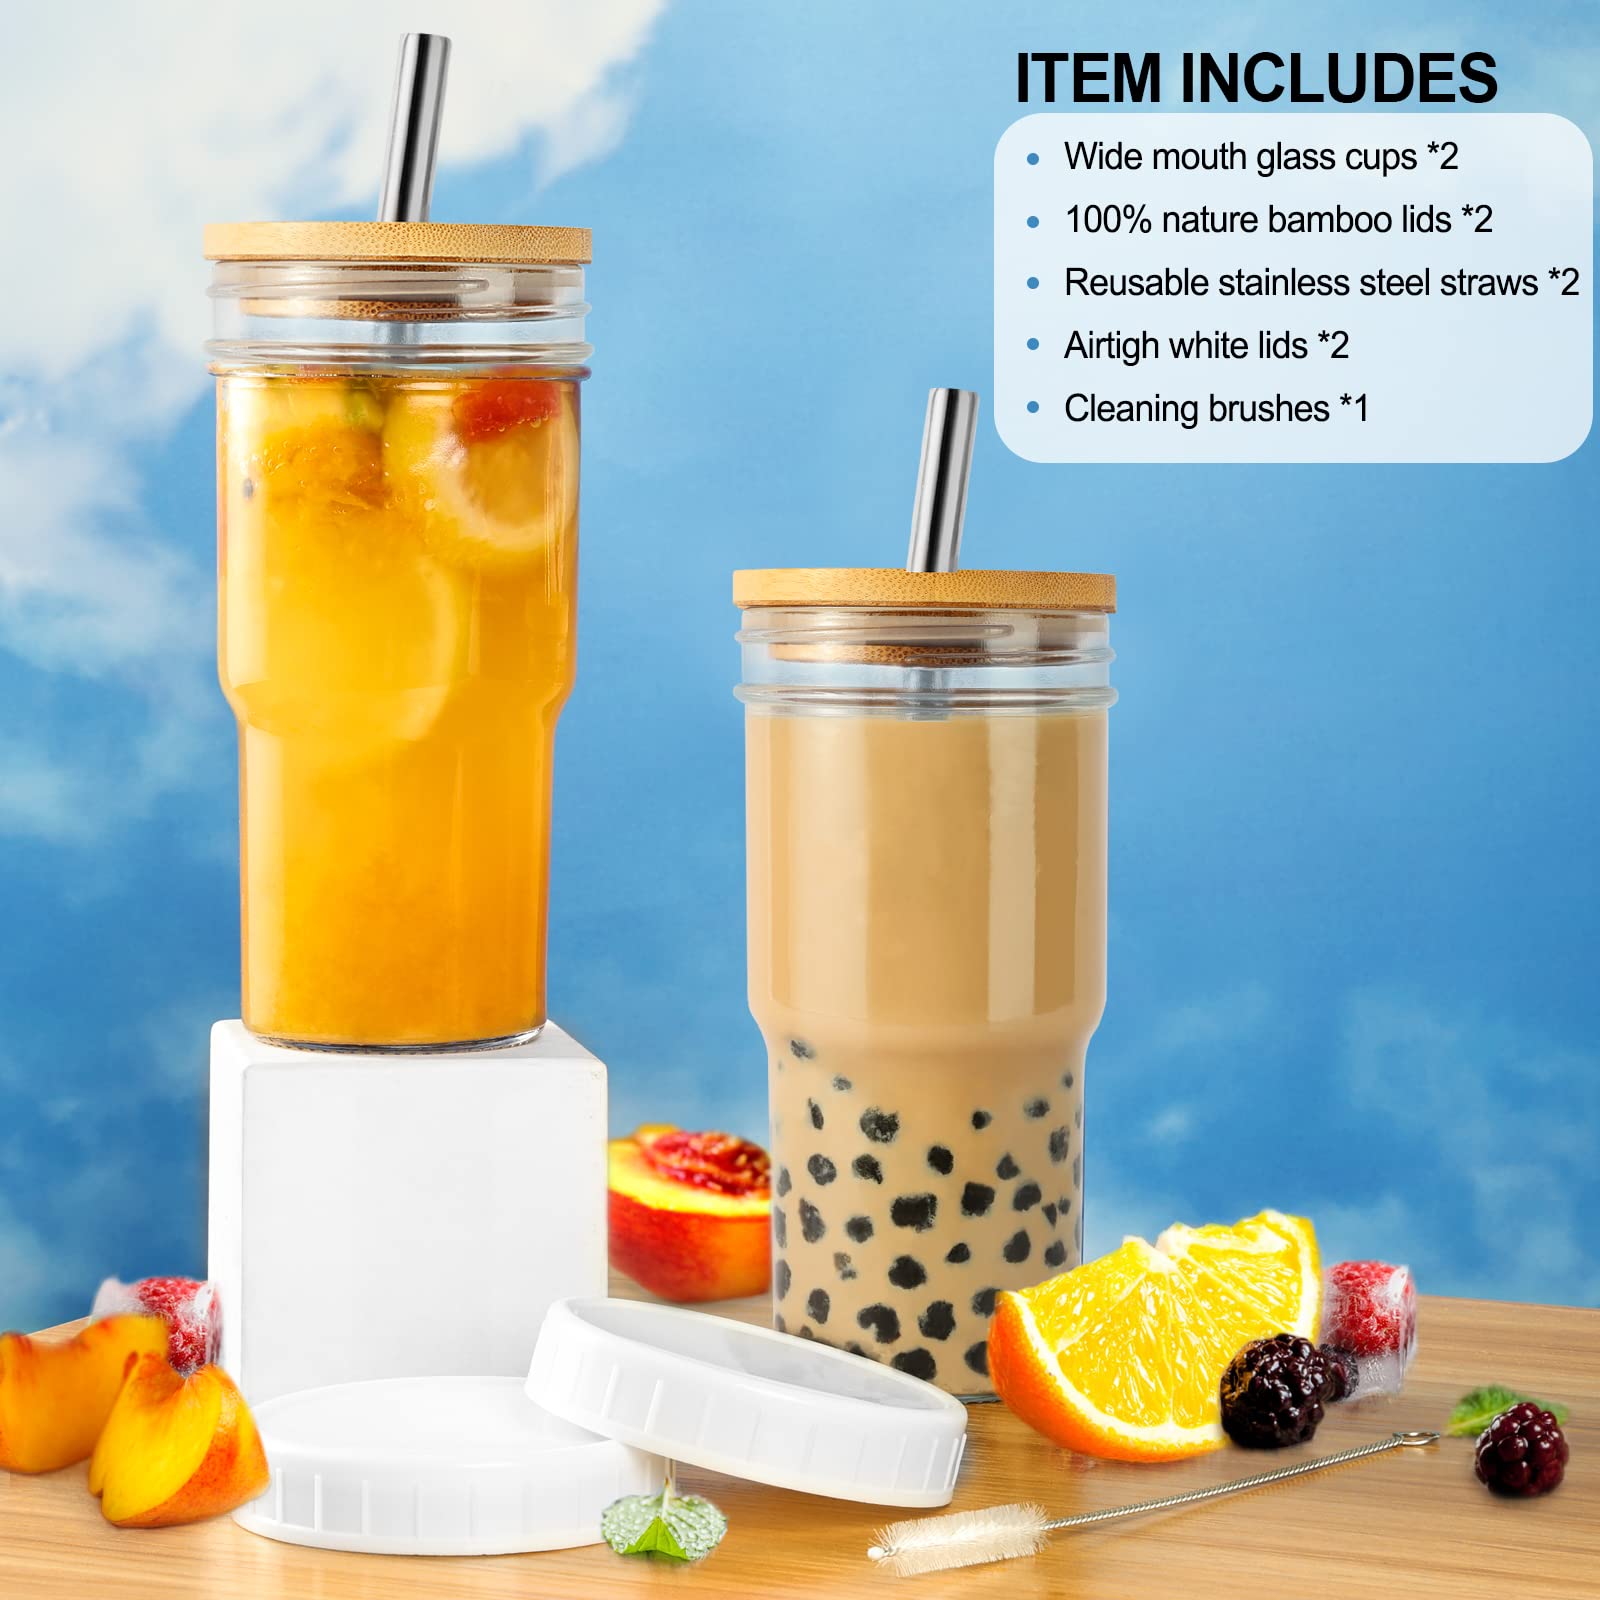 Reusable Boba Cup Smoothie Cup Boba Tea Cups, 2 Pack Wide Mouth 22oz Glasse Iced Coffee Cup with Bamboo Lid and Straw, Mason Jar Cup Drinking Glasses Tumbler with Straw and Lid (Silver Straw, 2)